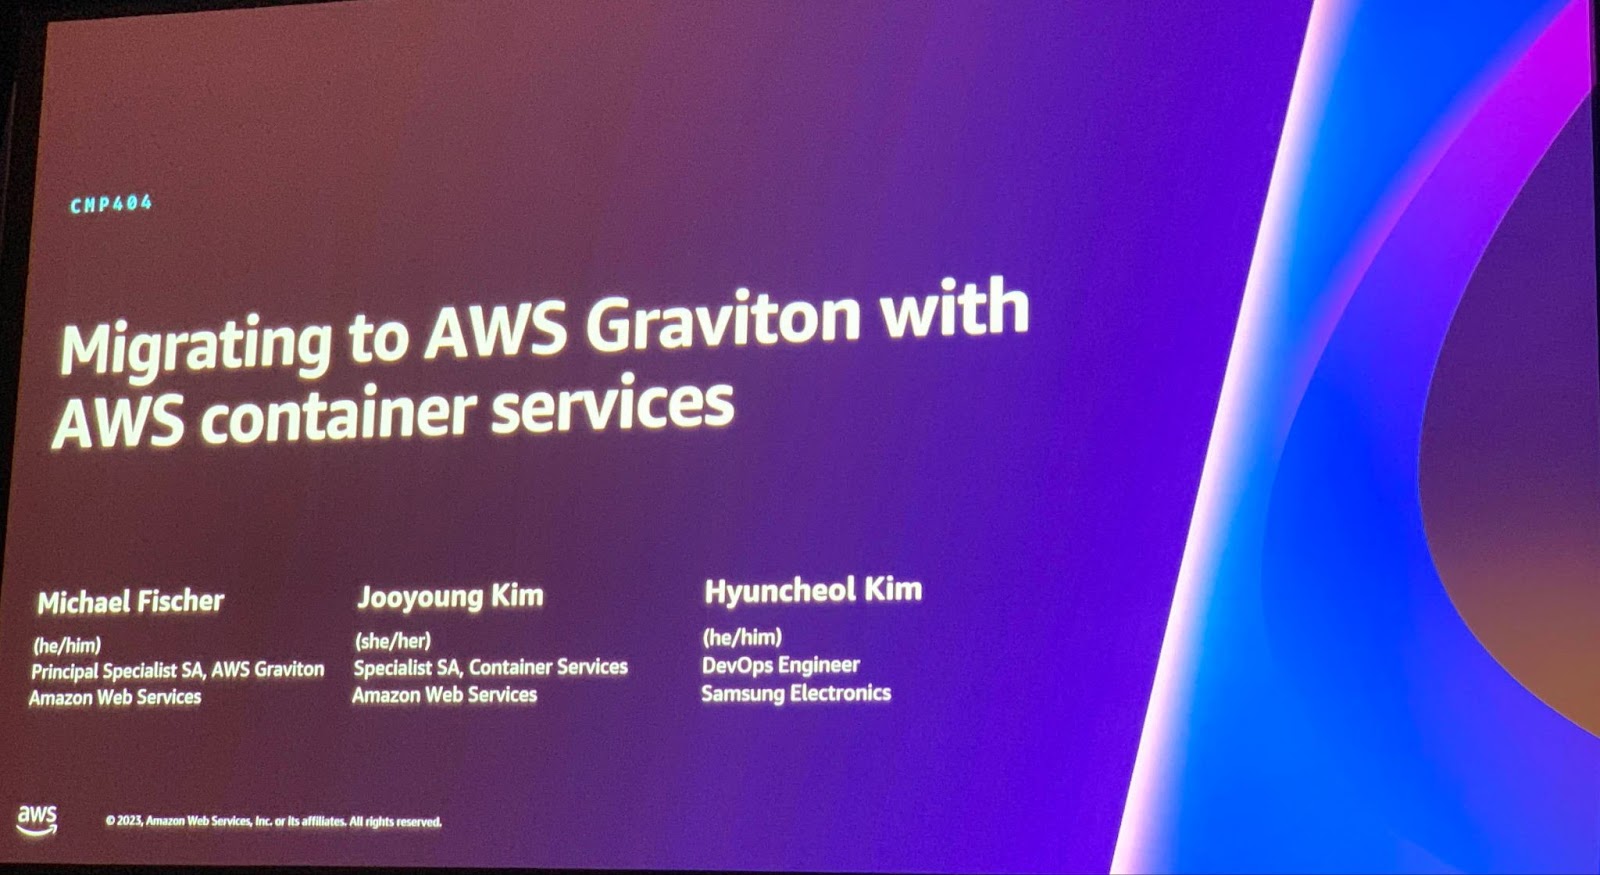 Migrating to AWS Graviton with AWS container services